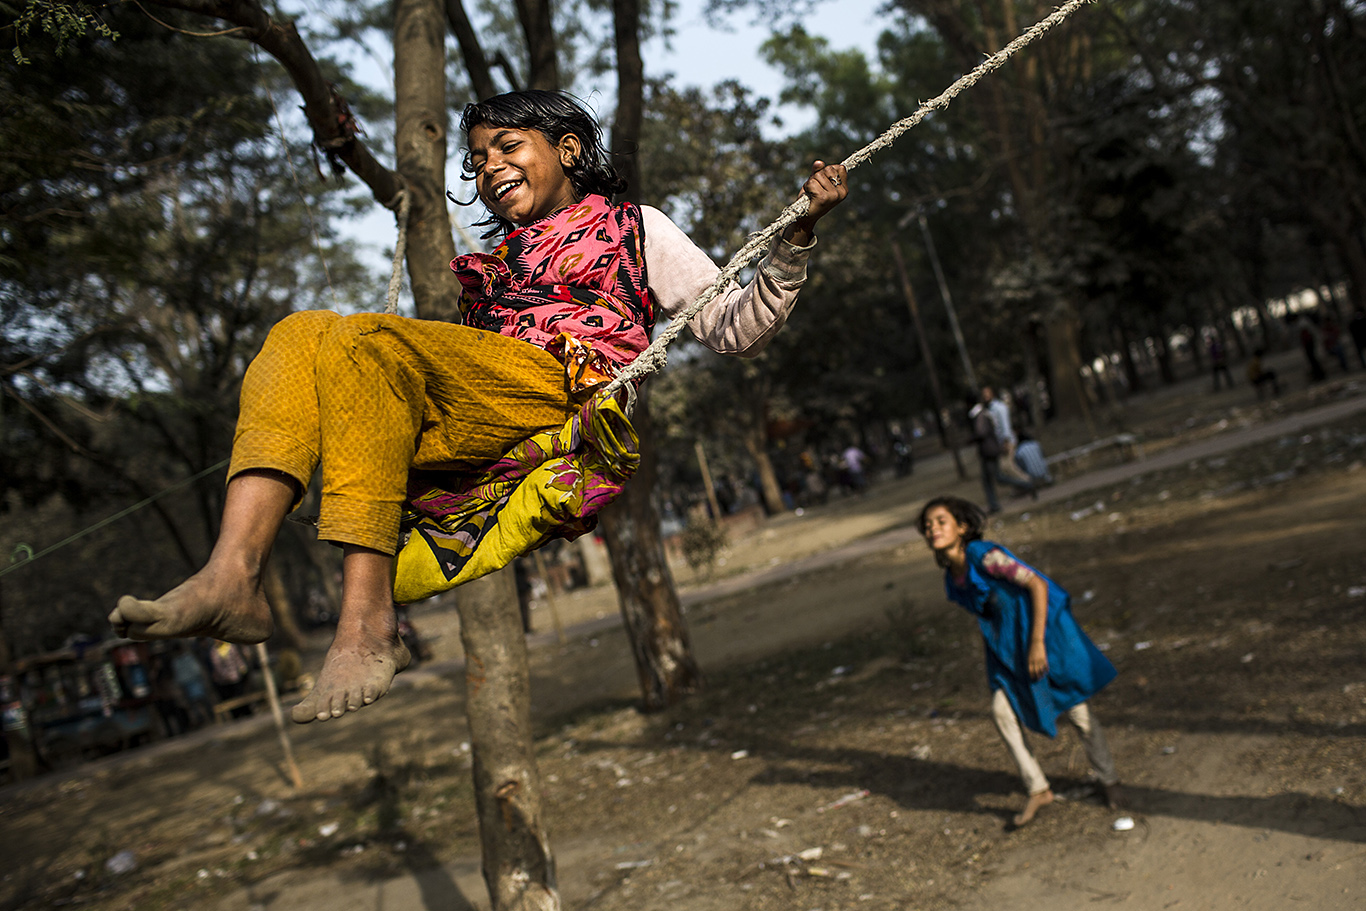 Two little girls who are living in a slum area situated at the heart of Dhaka, Bangladesh enjoy a ride on a makeshift swing. Dhaka has been named, according to several reports, the worst city in the world to live in.